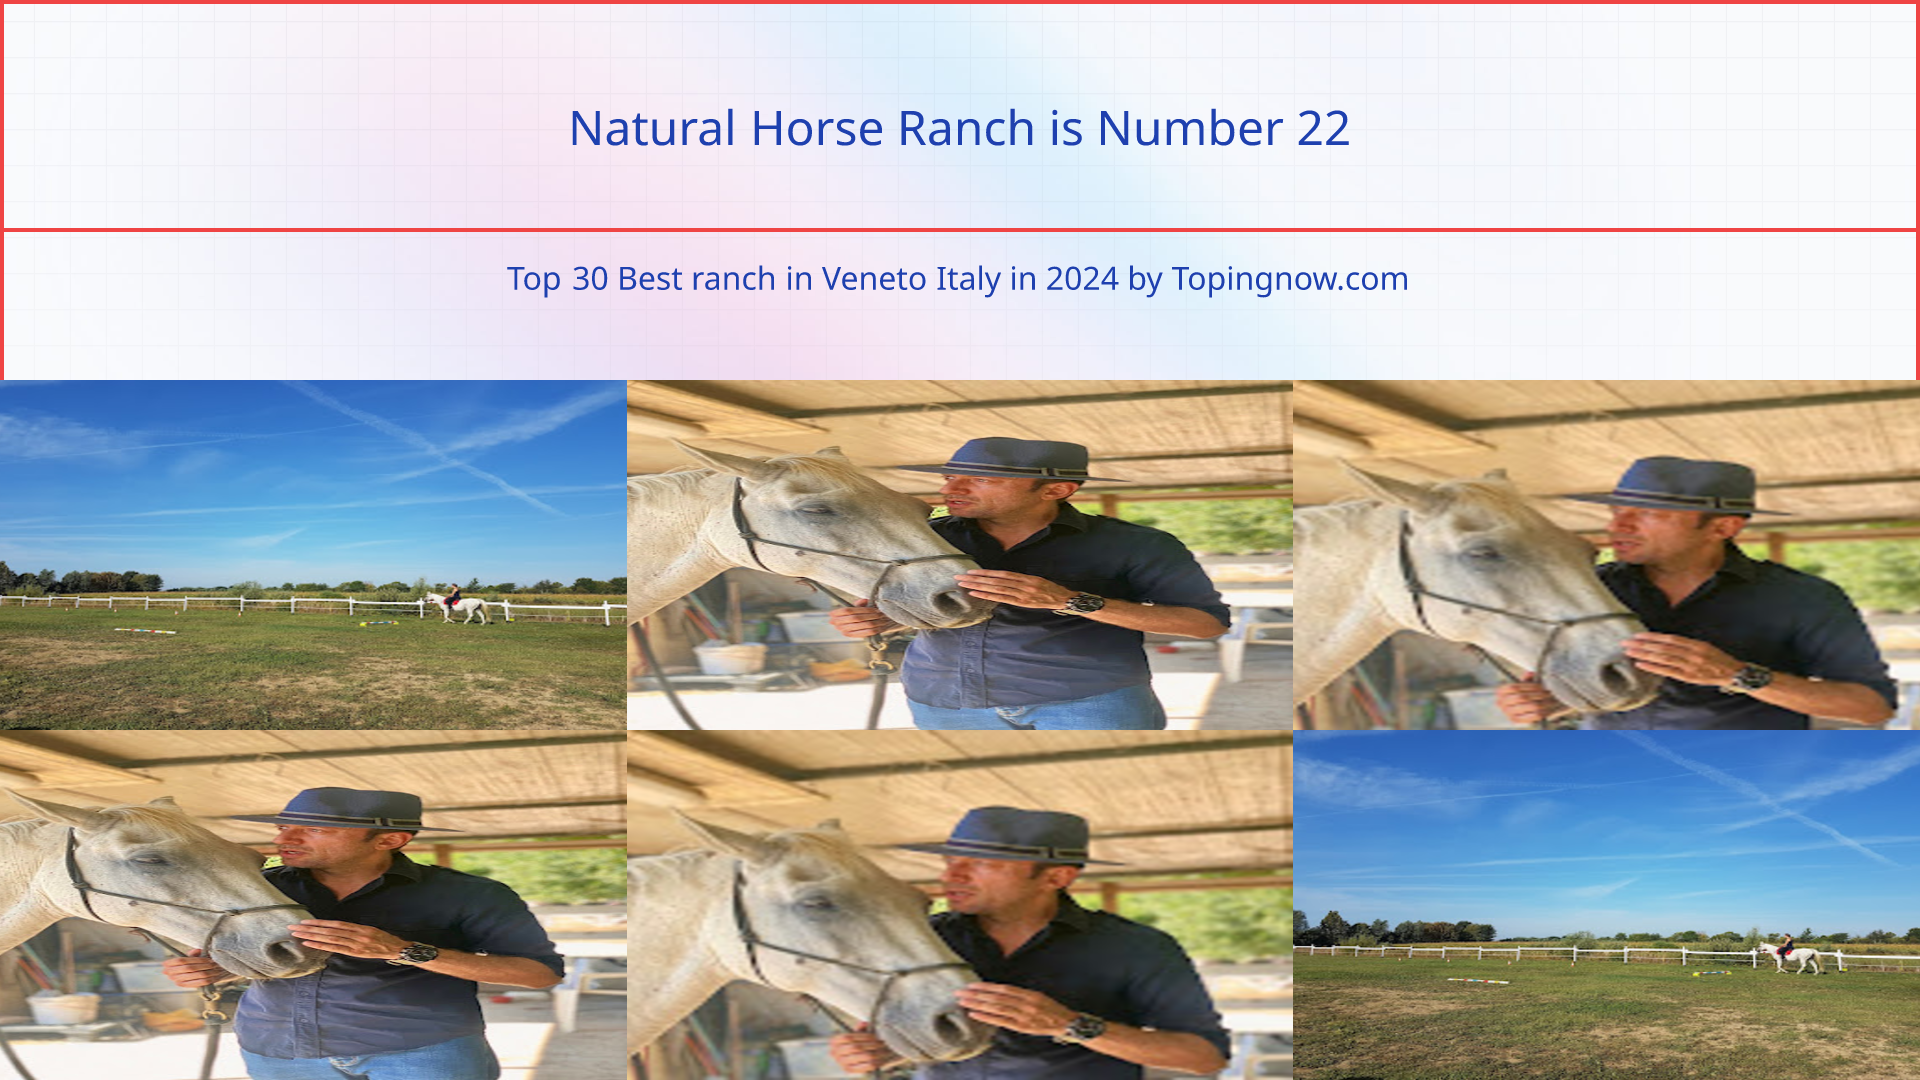 Natural Horse Ranch: Top 30 Best ranch in Veneto Italy in 2024